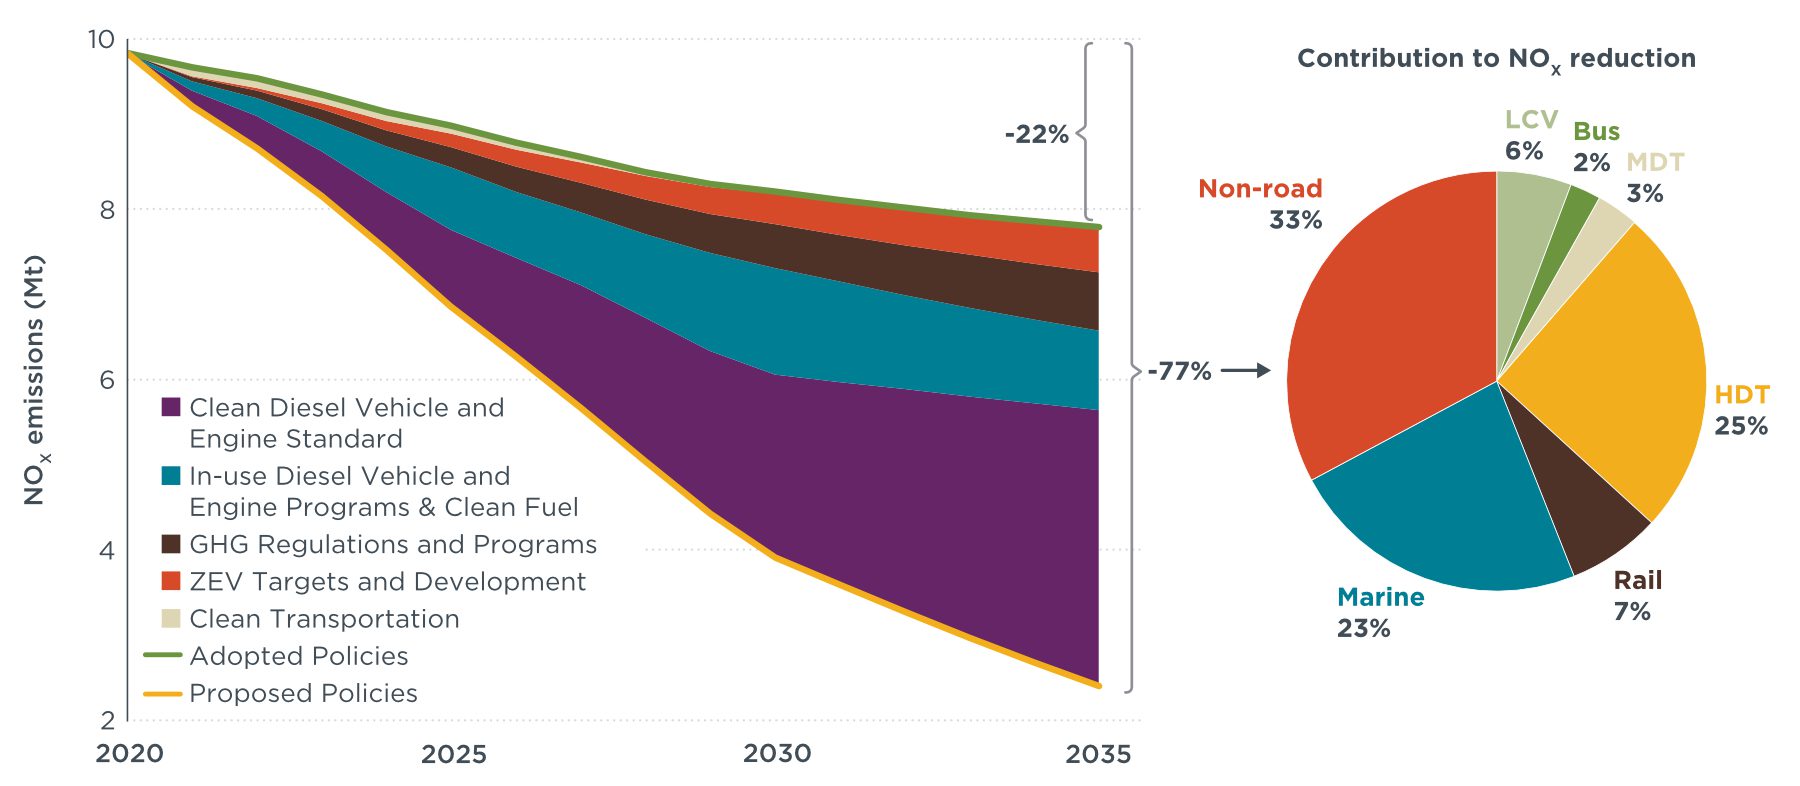 line chart on the left shows emissions reductions with areas shaded by policy category and the pie chart on the right show percentage contributions to the reductions by segment 